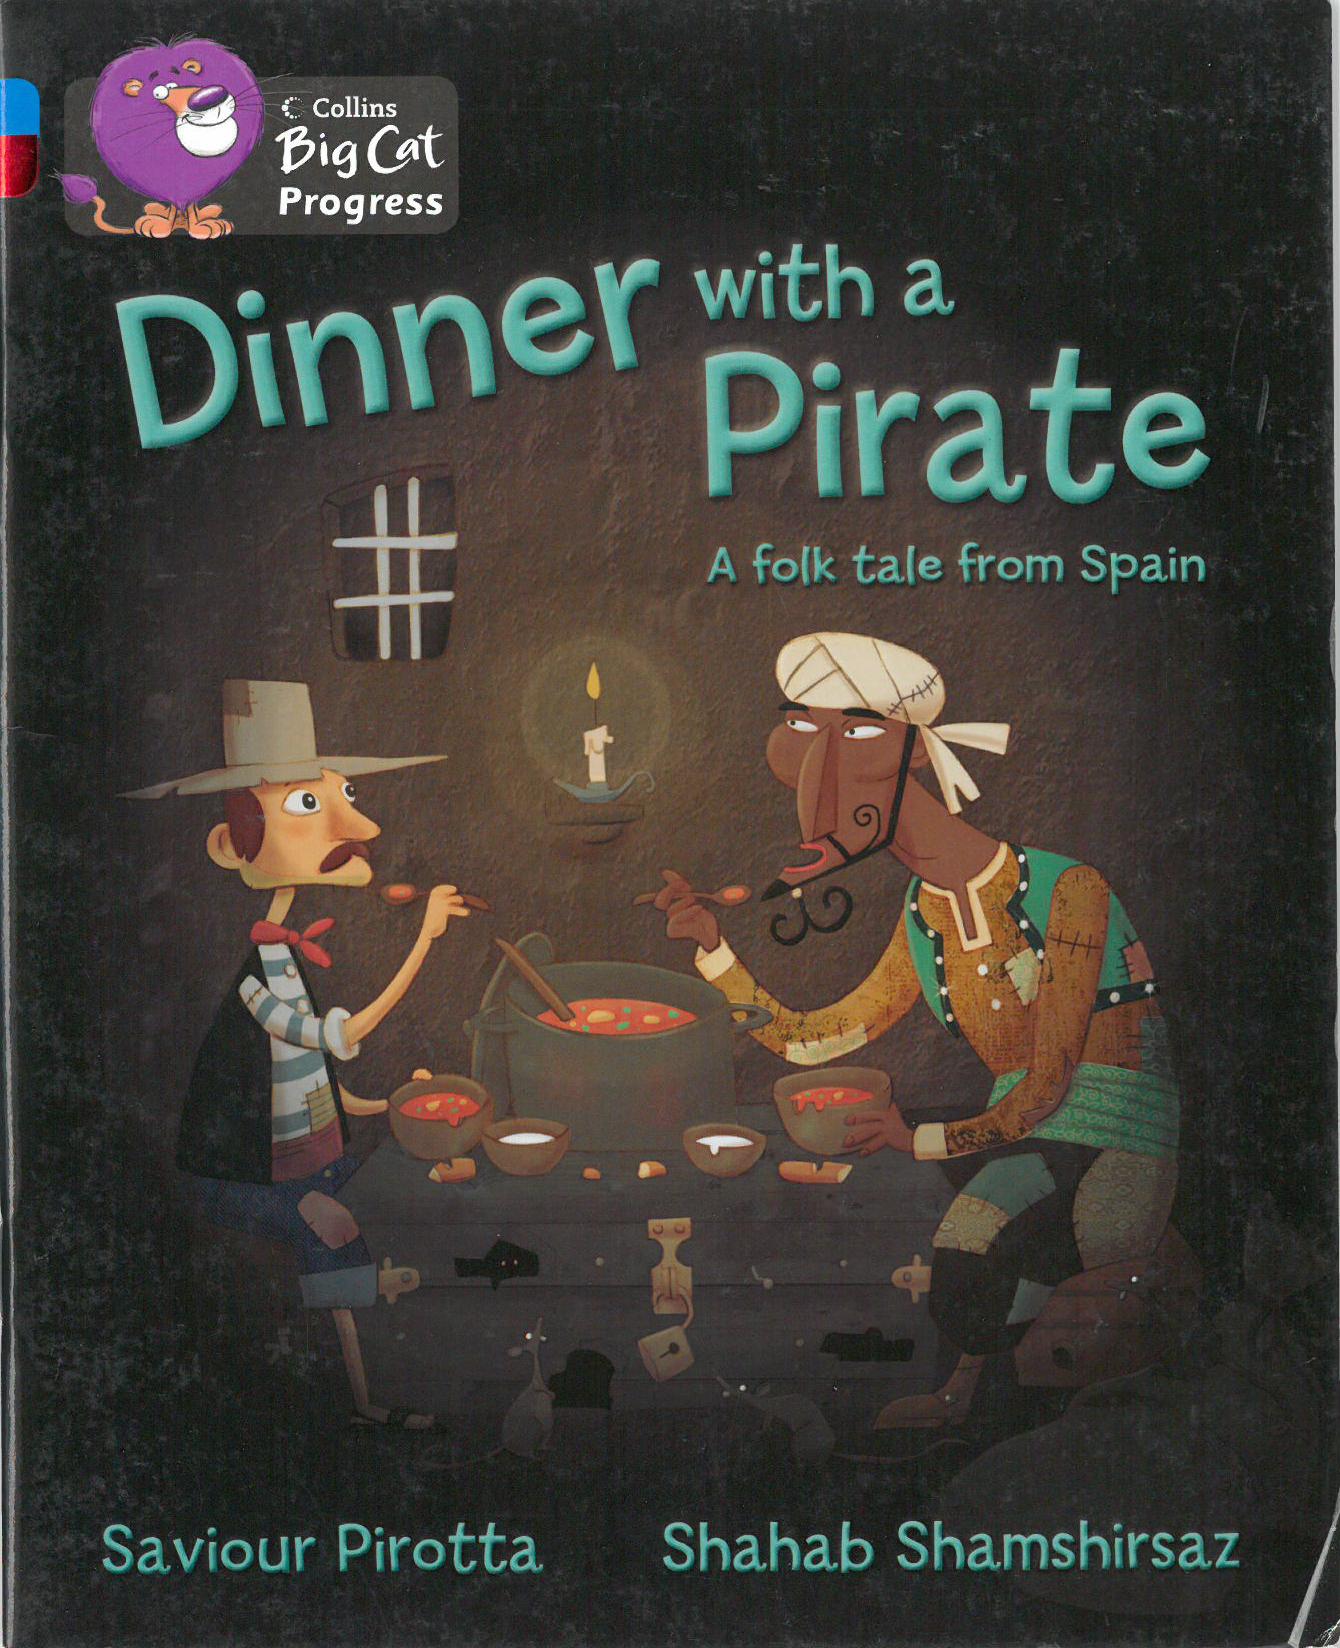 Dinner with a Pirate - A folk tale from Spain